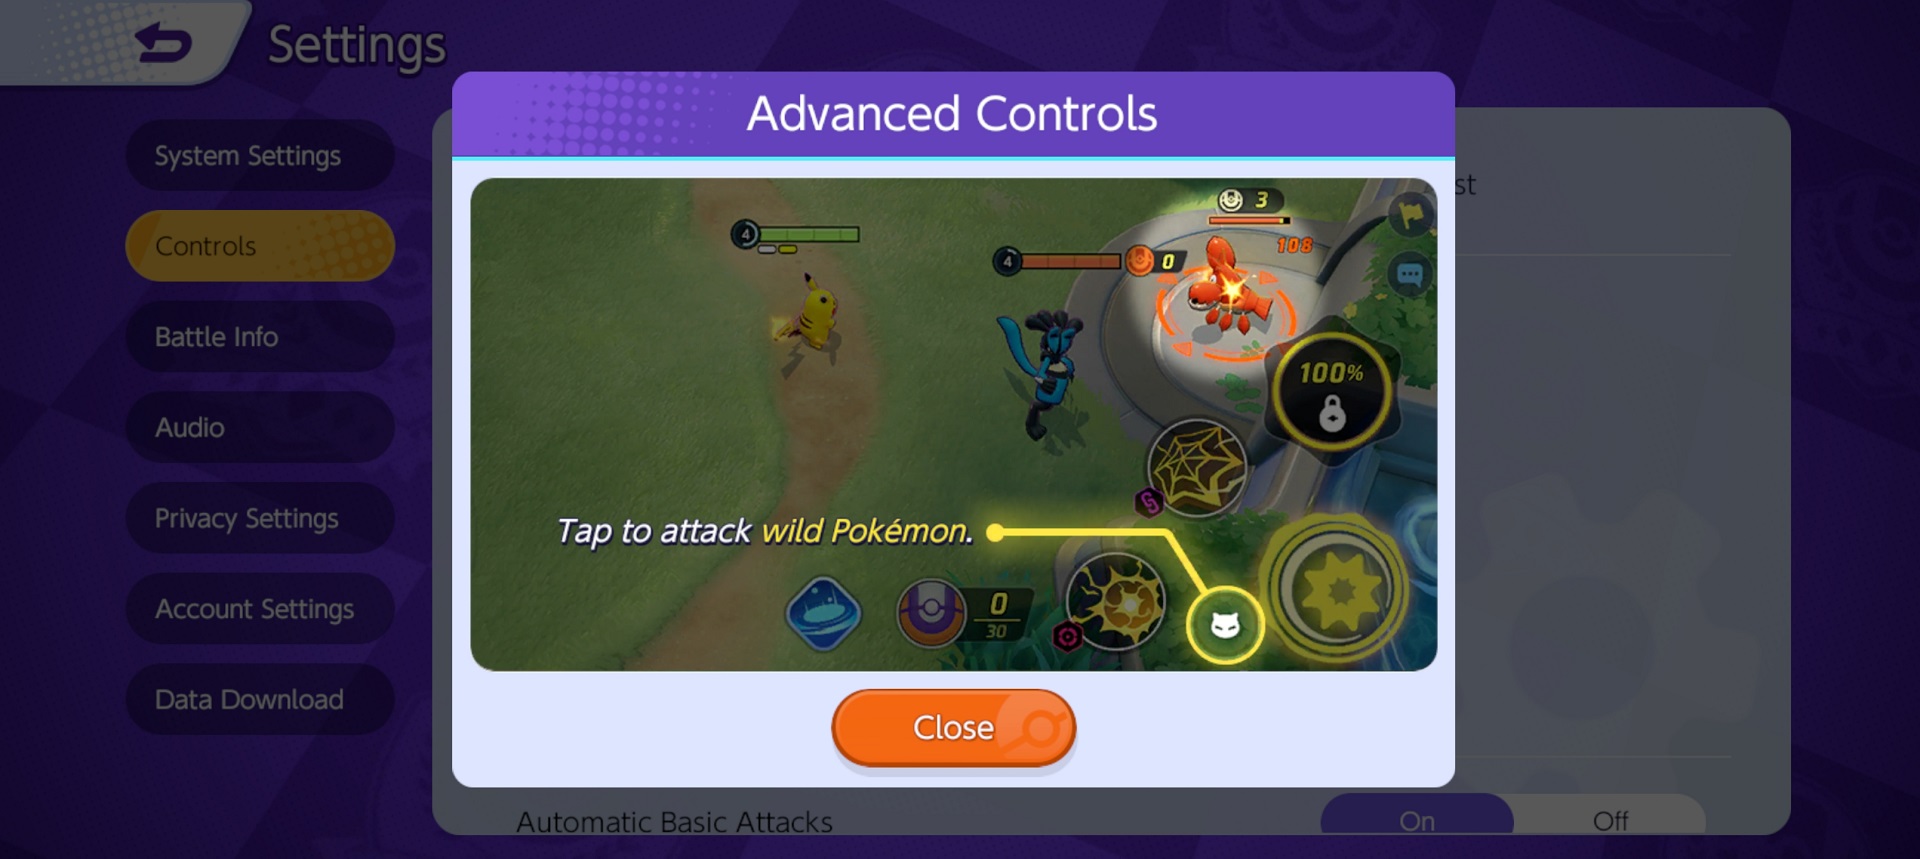 Pokémon Unite: How To Share Save Data Between Nintendo Switch And Mobile  Devices - Guide